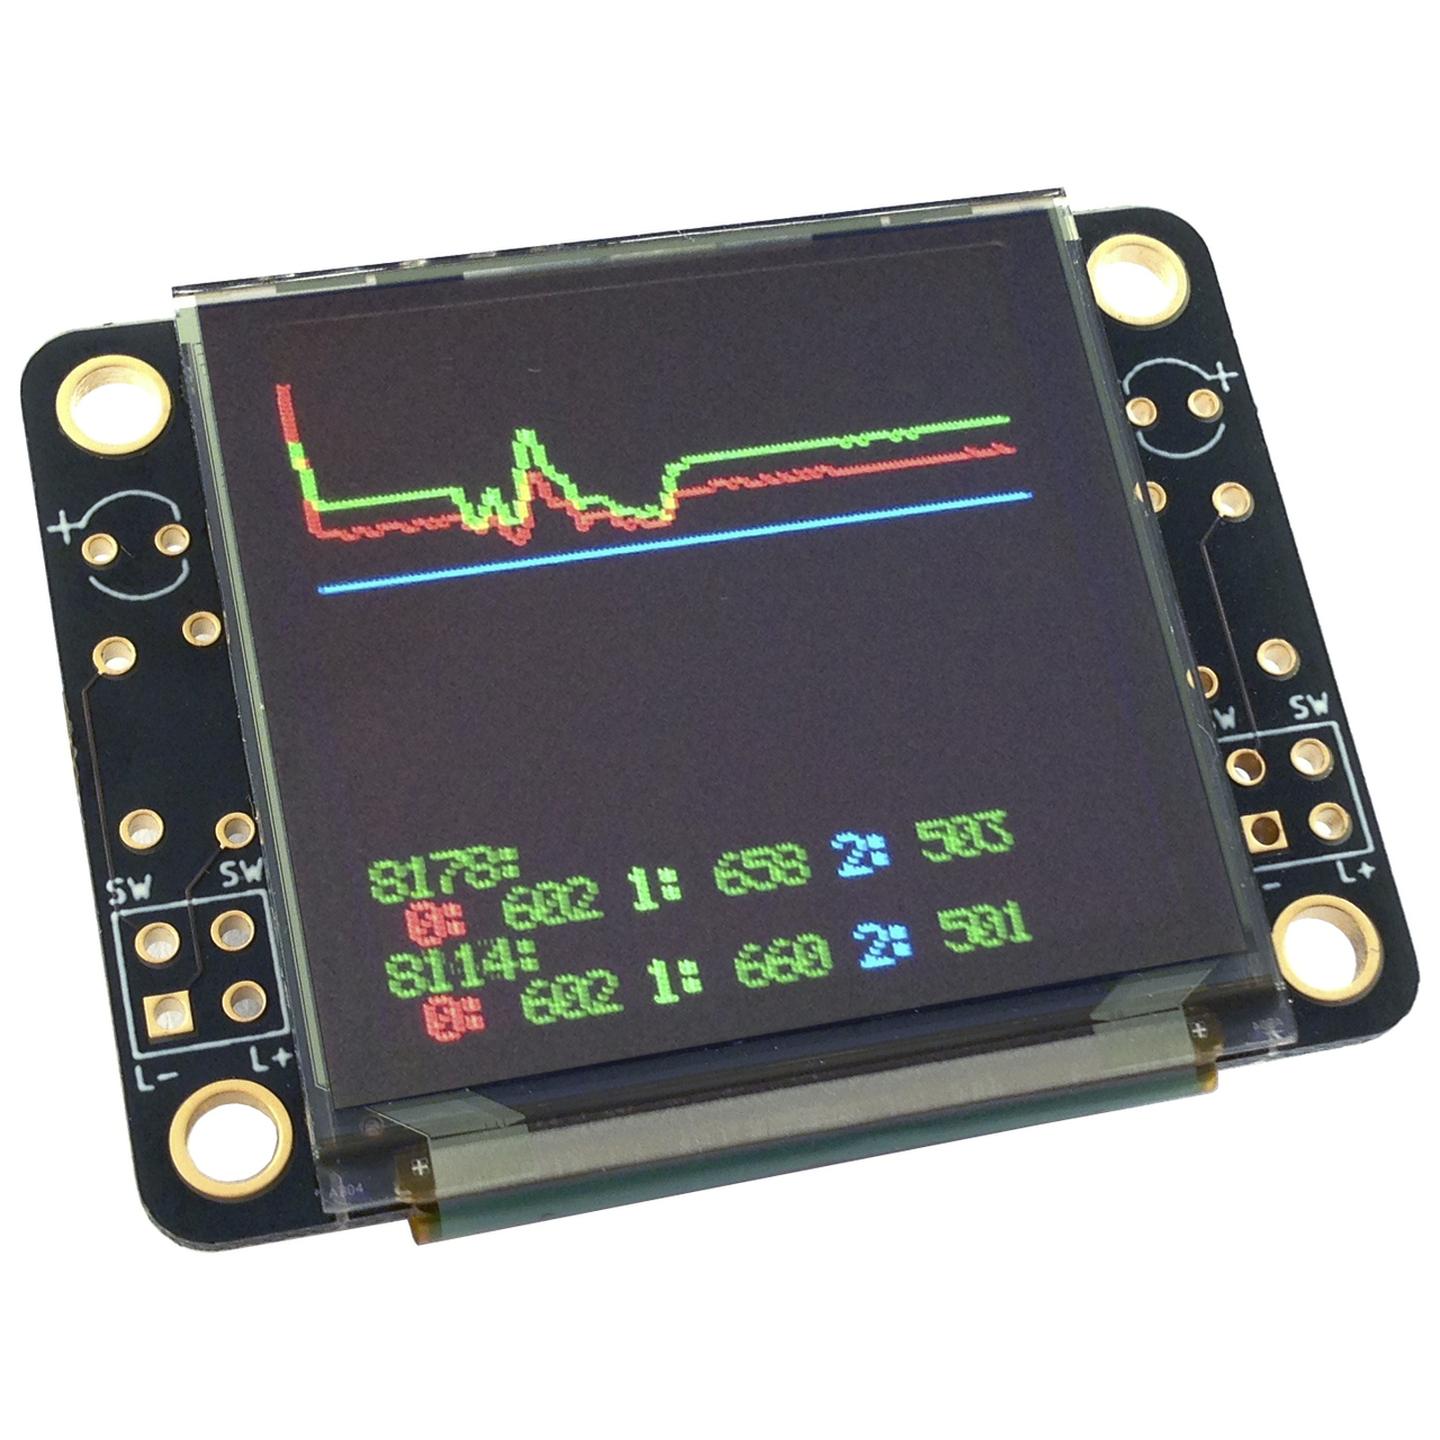 128x128 Pixel OLED Display Module for Arduino